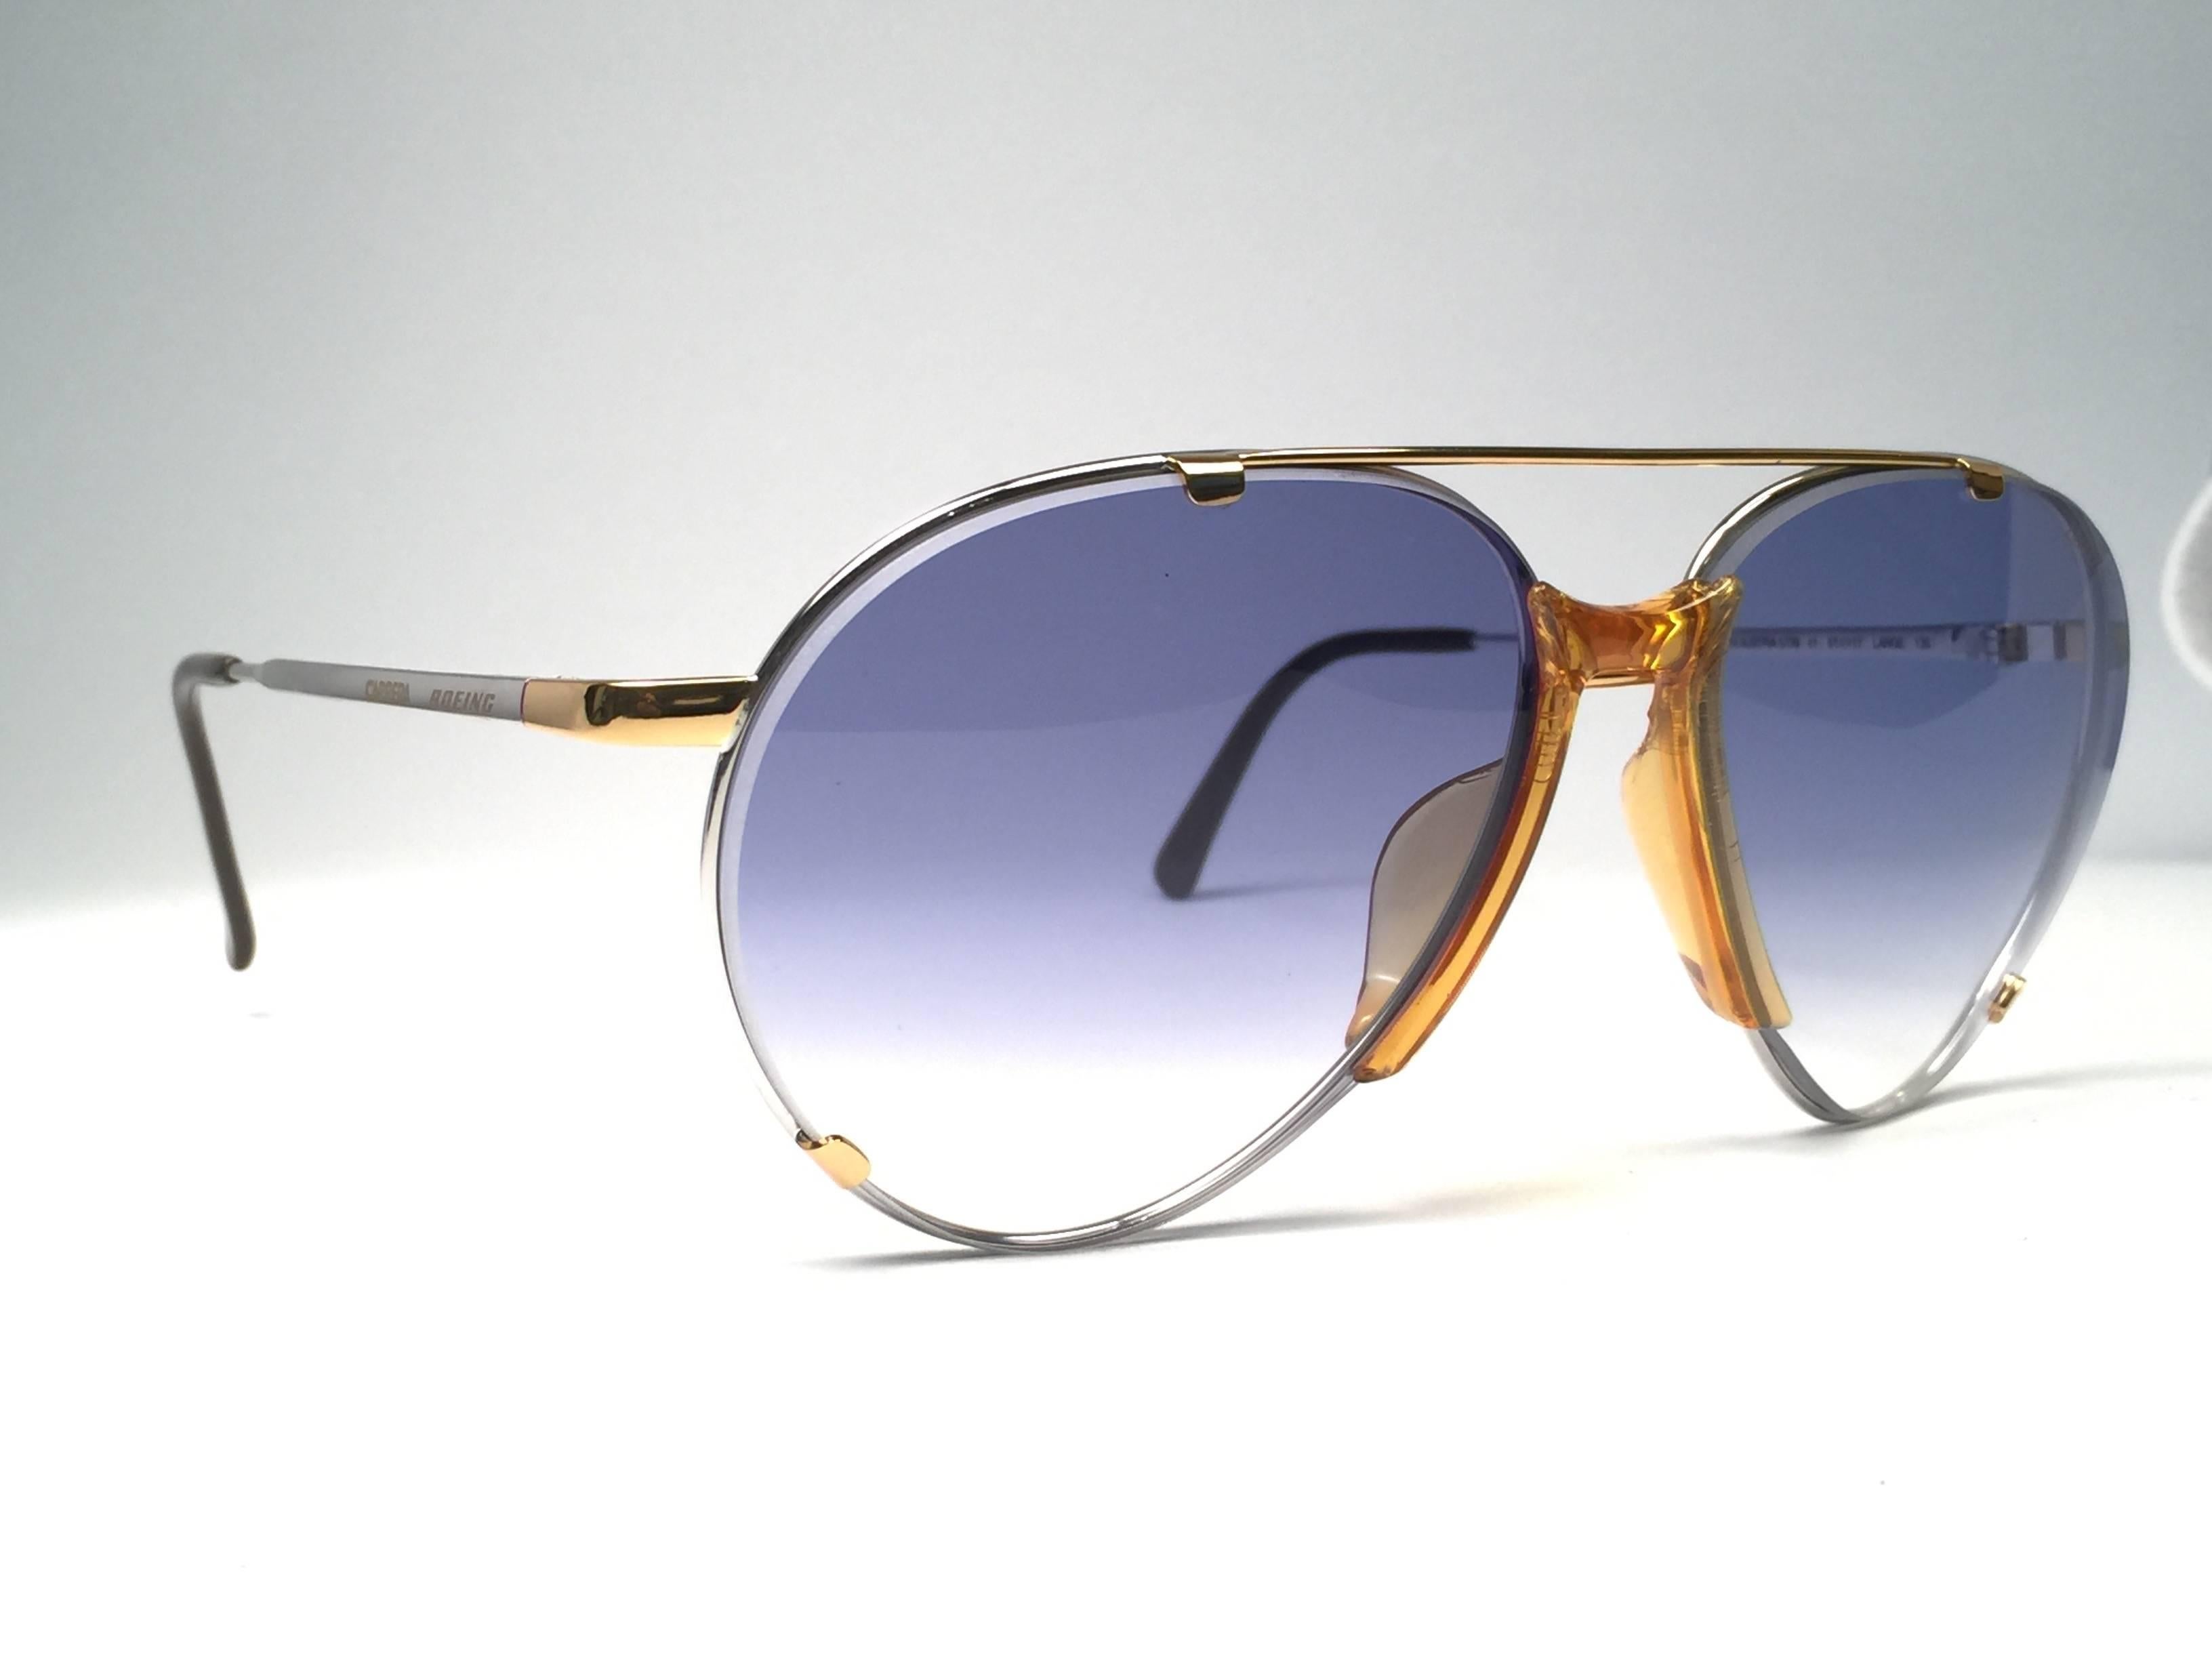 New 1980's Boeing by Carrera Collection aviator silver, gold and acetate details frame with medium blue lenses.   Amazing craftsmanship and quality.   


New, never worn. Made in Austria.